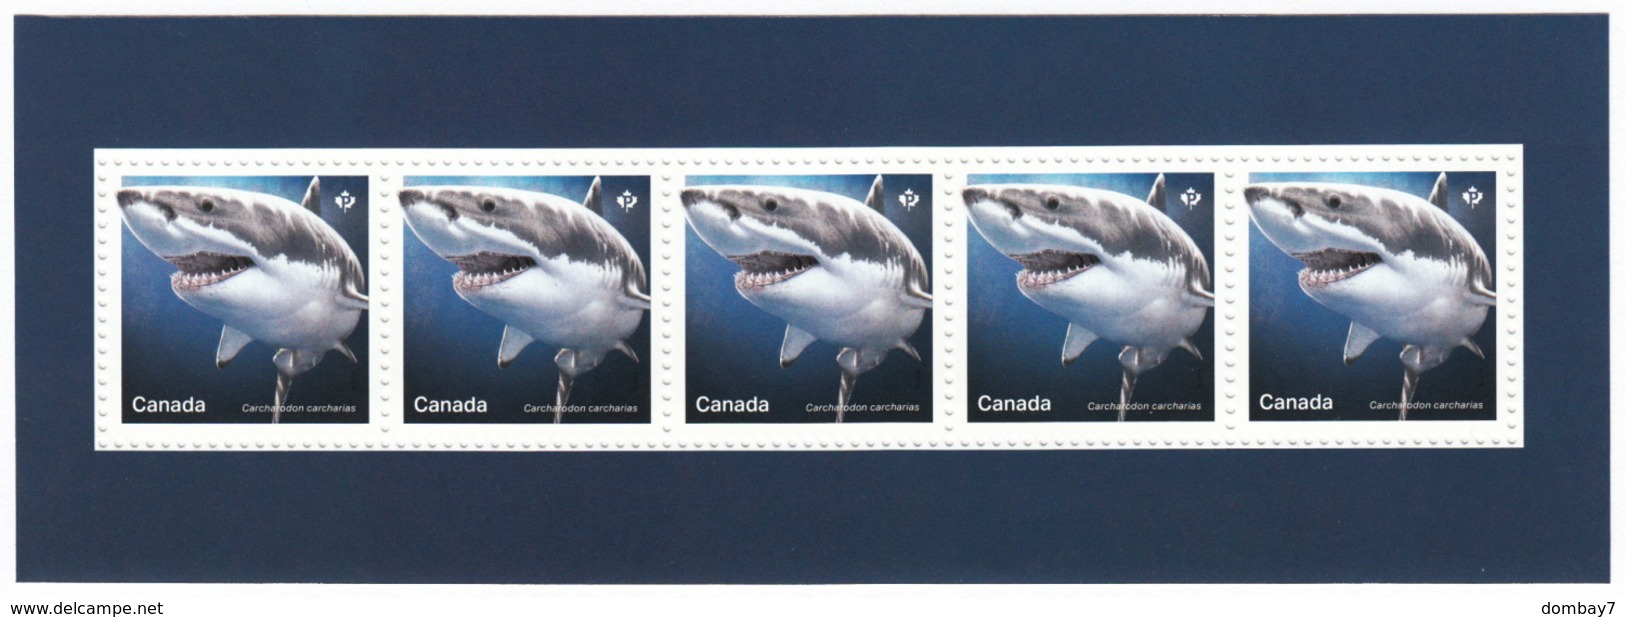 = SHARKS In Canadian Waters = HAIFISCH = REQUIN = Tiburón = SQUALO = 5 Souvenir Sheets From Uncut Sheet Canada 2018 - Vie Marine